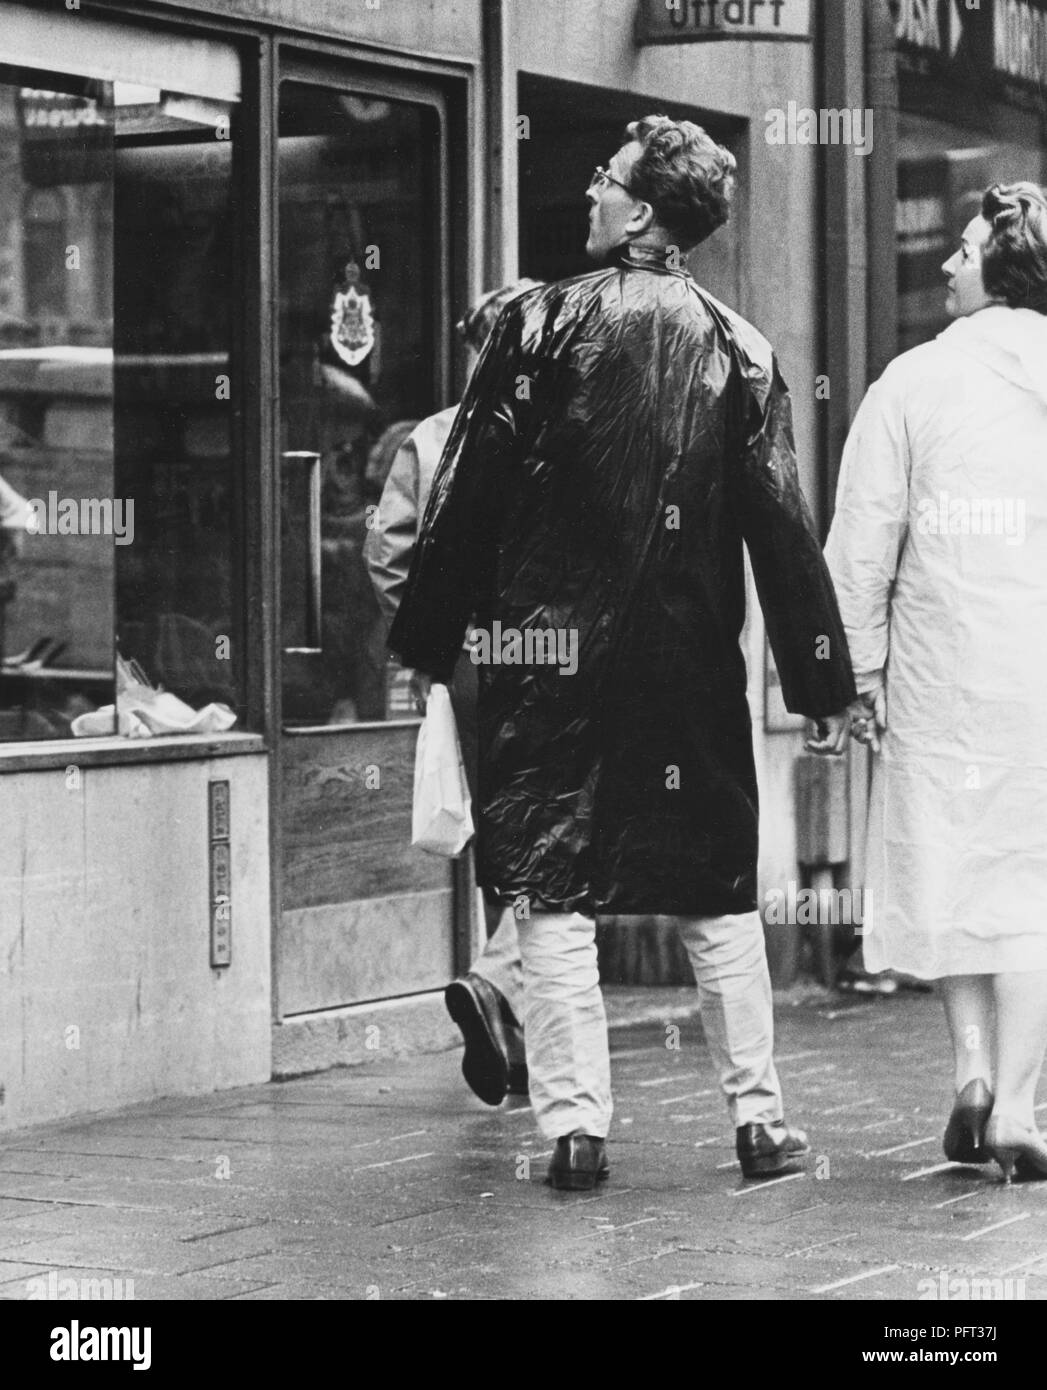 1960s rainy day. A couple dressed in raincoats are walking down a street looking into windows of the shops they pass. Sweden 1965 Stock Photo